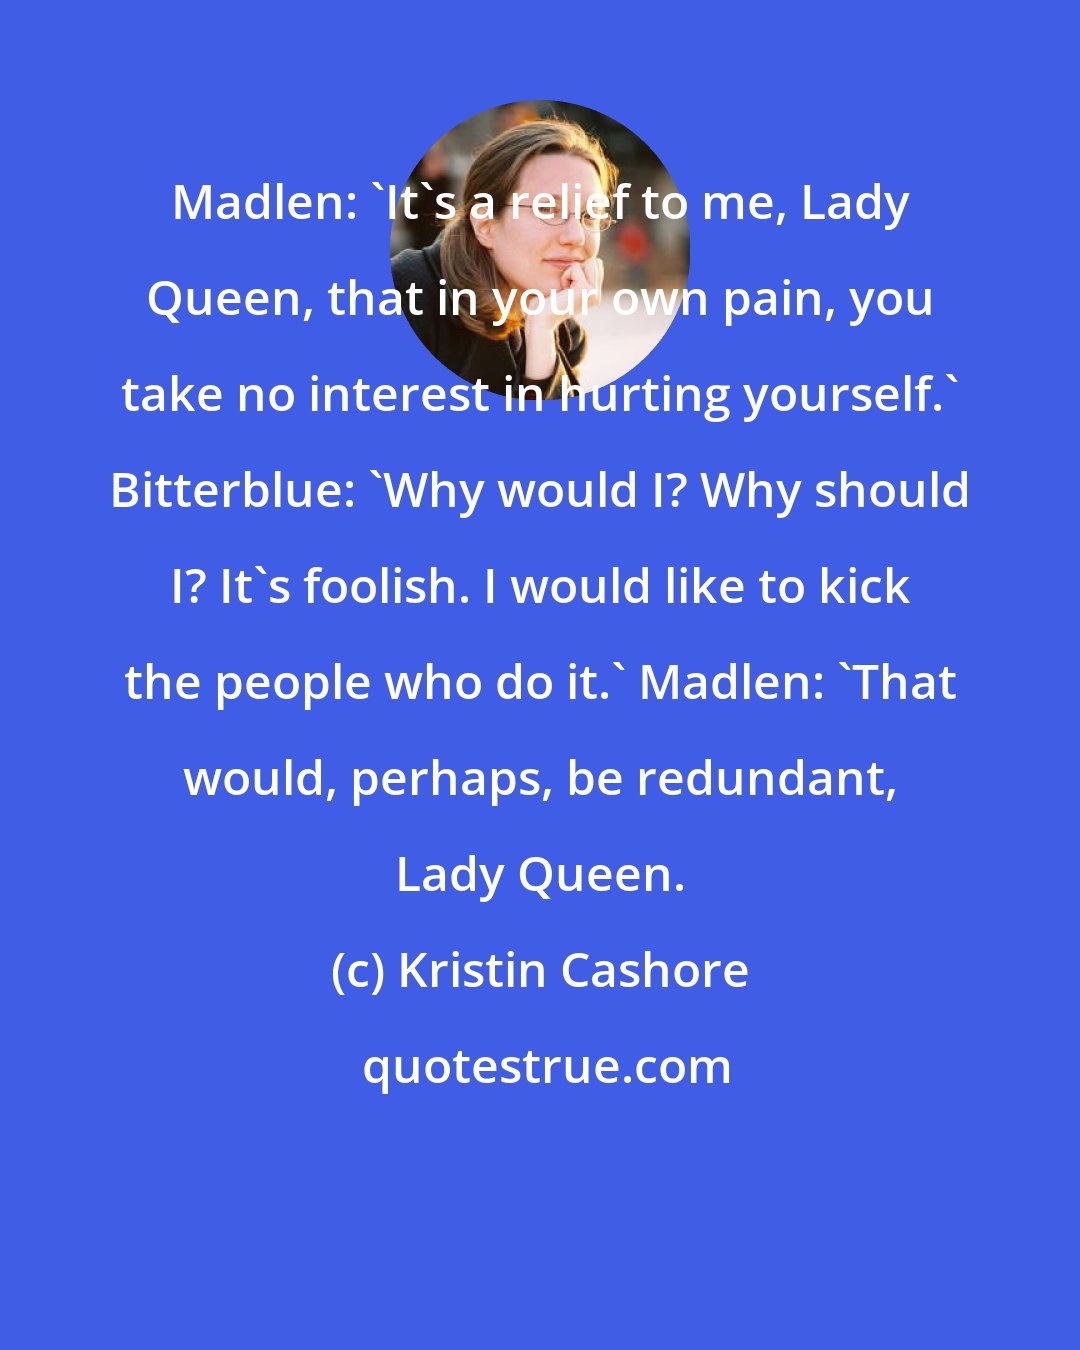 Kristin Cashore: Madlen: 'It's a relief to me, Lady Queen, that in your own pain, you take no interest in hurting yourself.' Bitterblue: 'Why would I? Why should I? It's foolish. I would like to kick the people who do it.' Madlen: 'That would, perhaps, be redundant, Lady Queen.